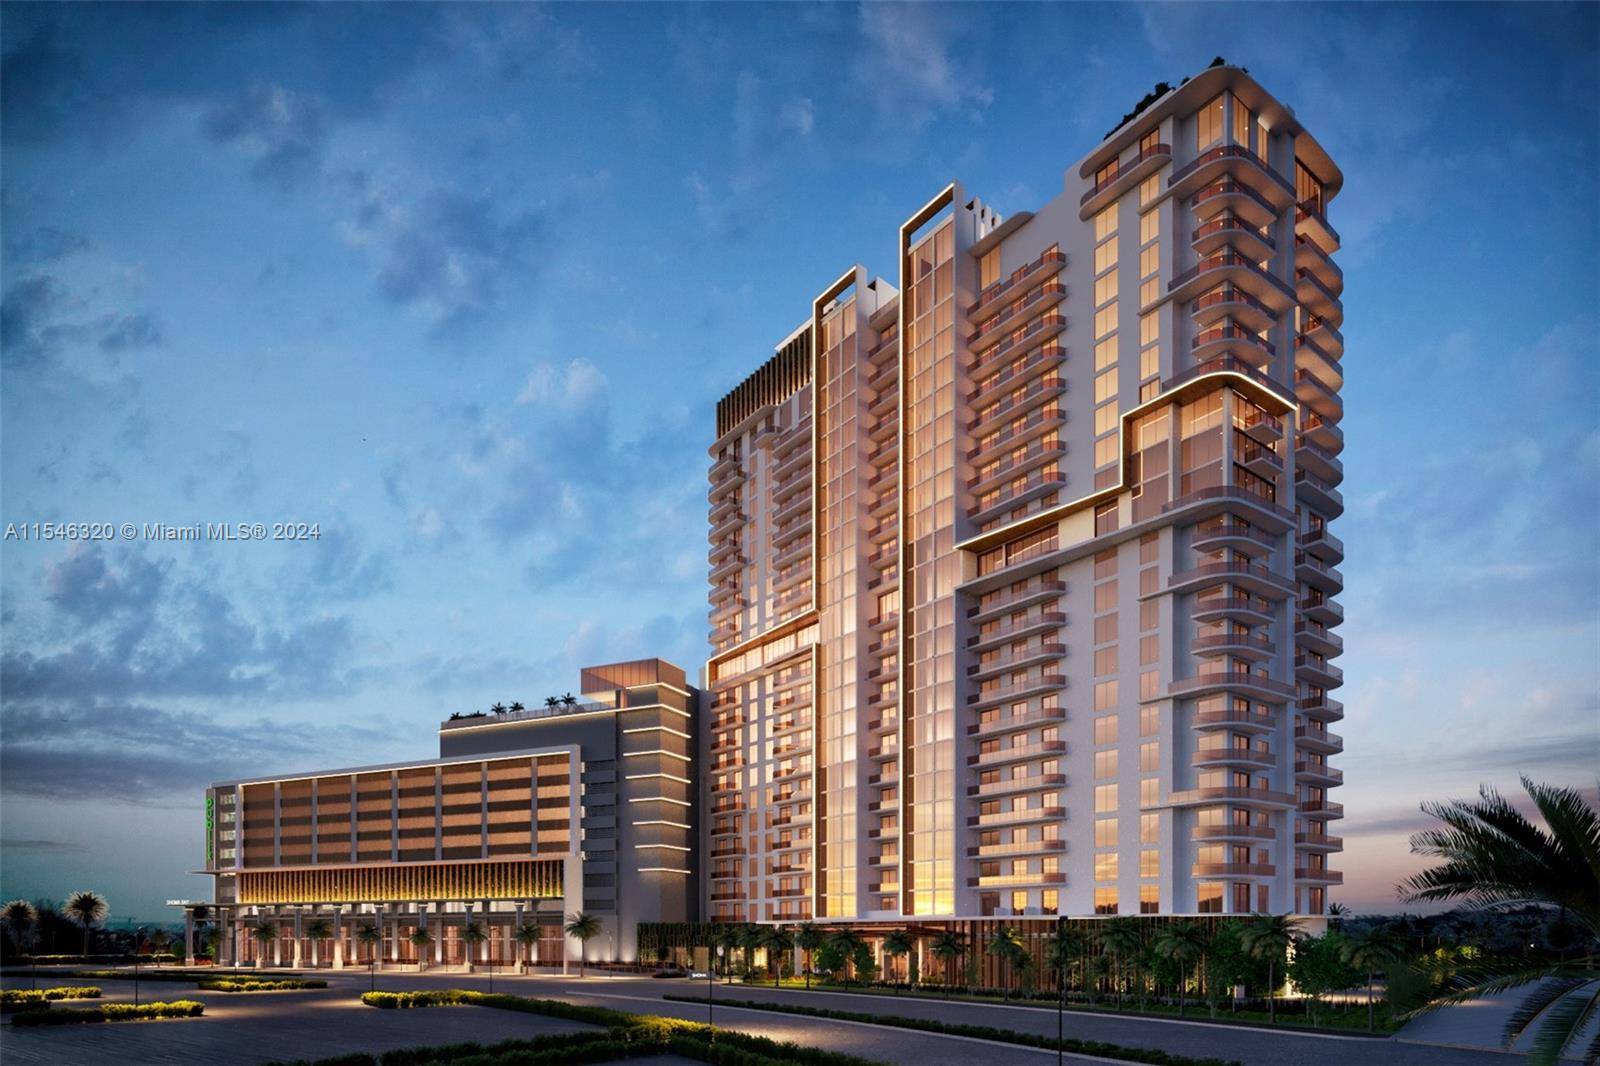 Shoma Bay consists of a 24 story of 333 condominium units where the design seamlessly melds a classic art deco aesthetic with a modern facade while adding community minded amenities ...